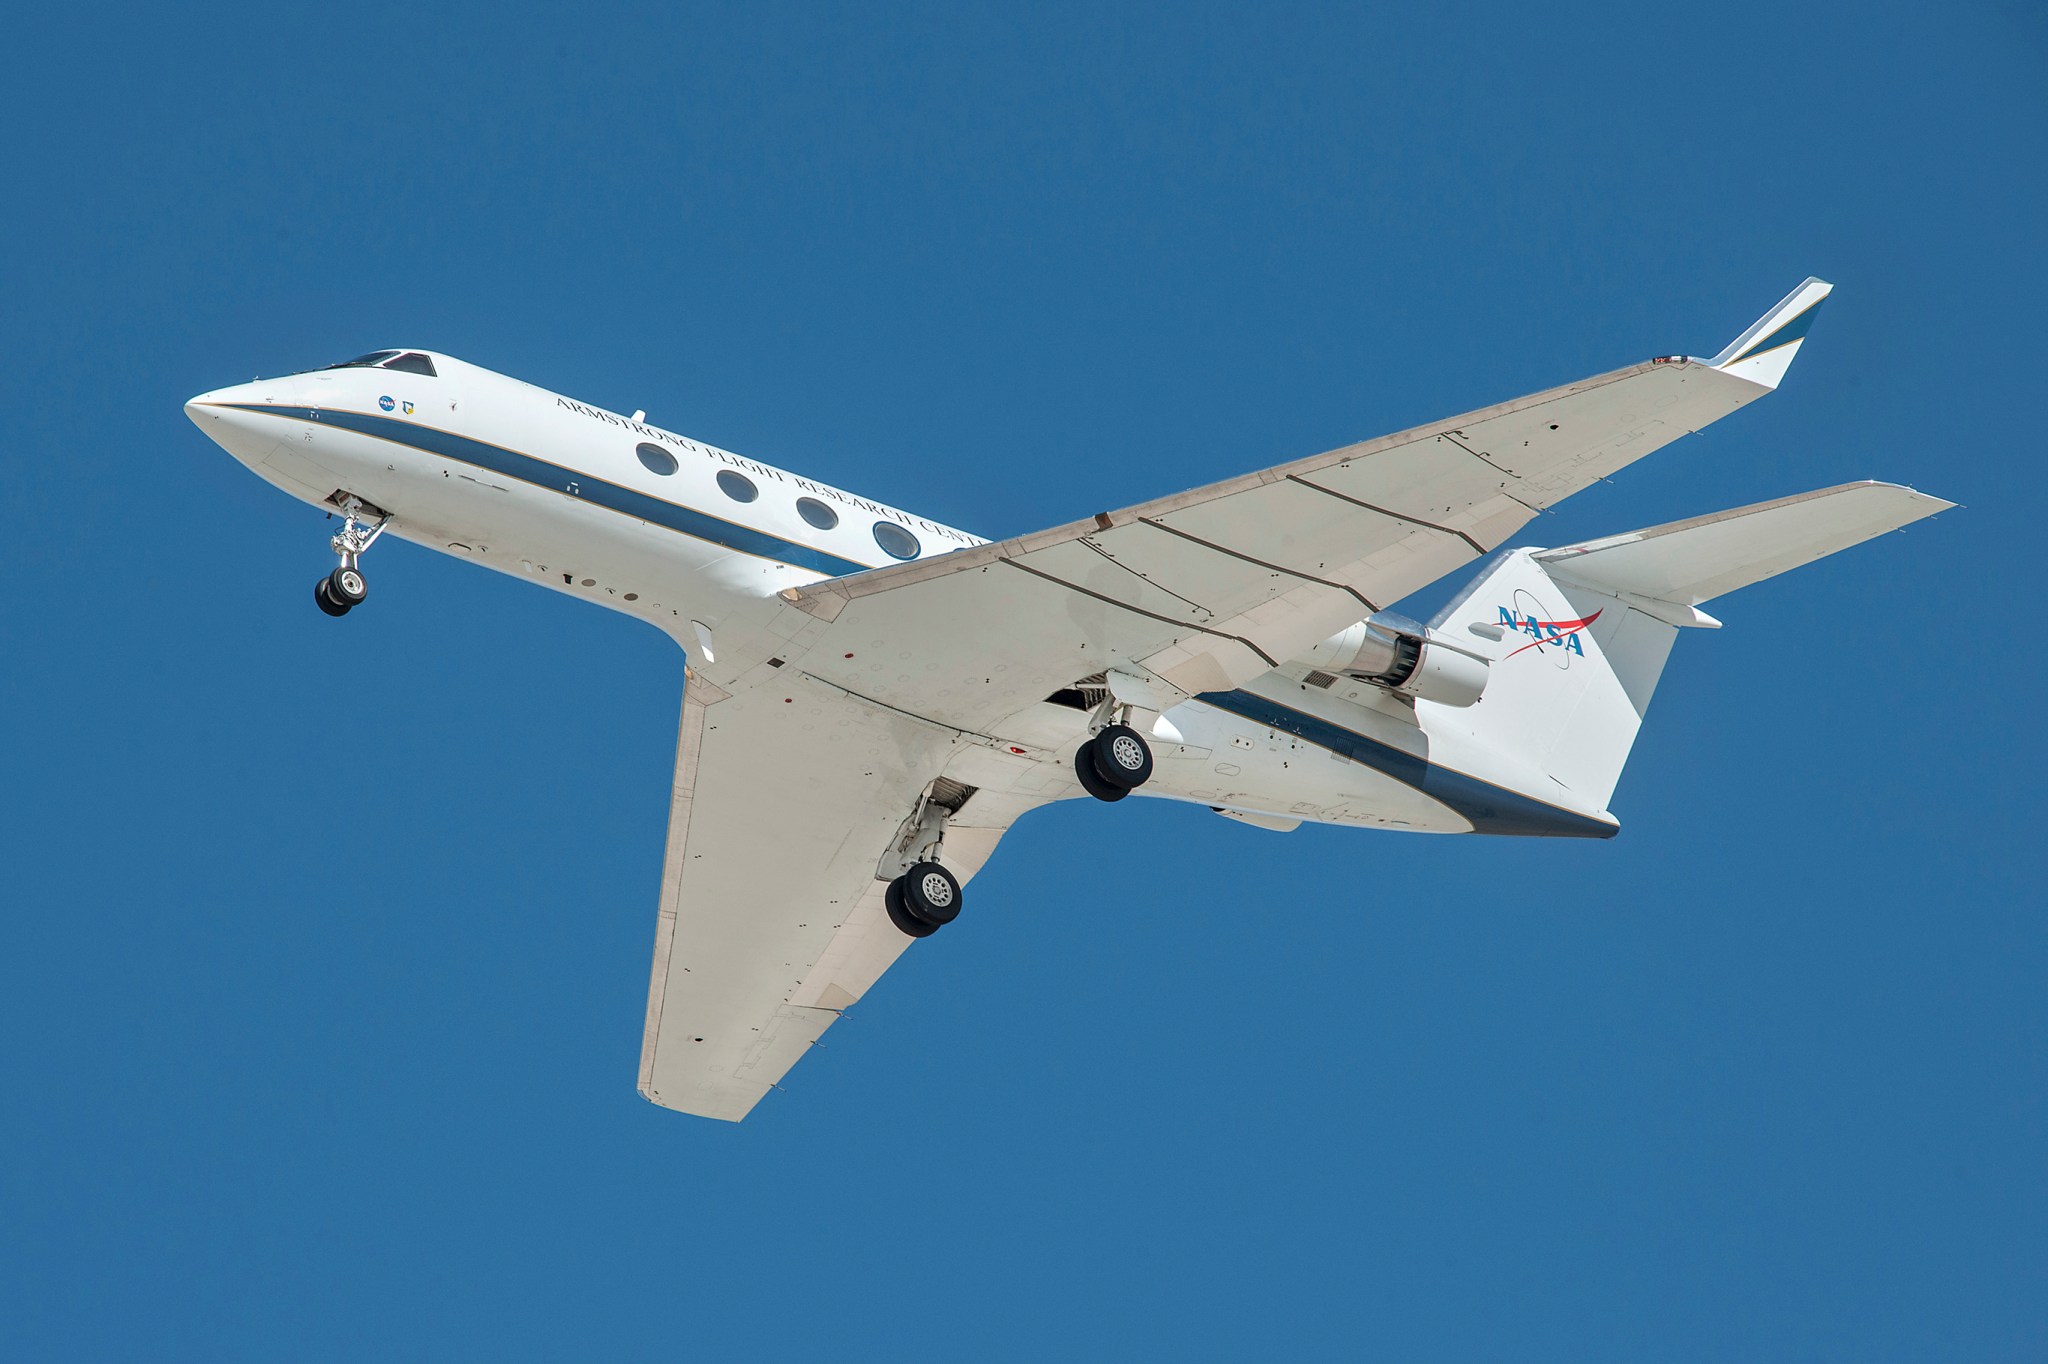 NASA’s SubsoniC Research Aircraft Testbed G-III aircraft, or SCRAT, at NASA’s Armstrong Flight Research Center in California